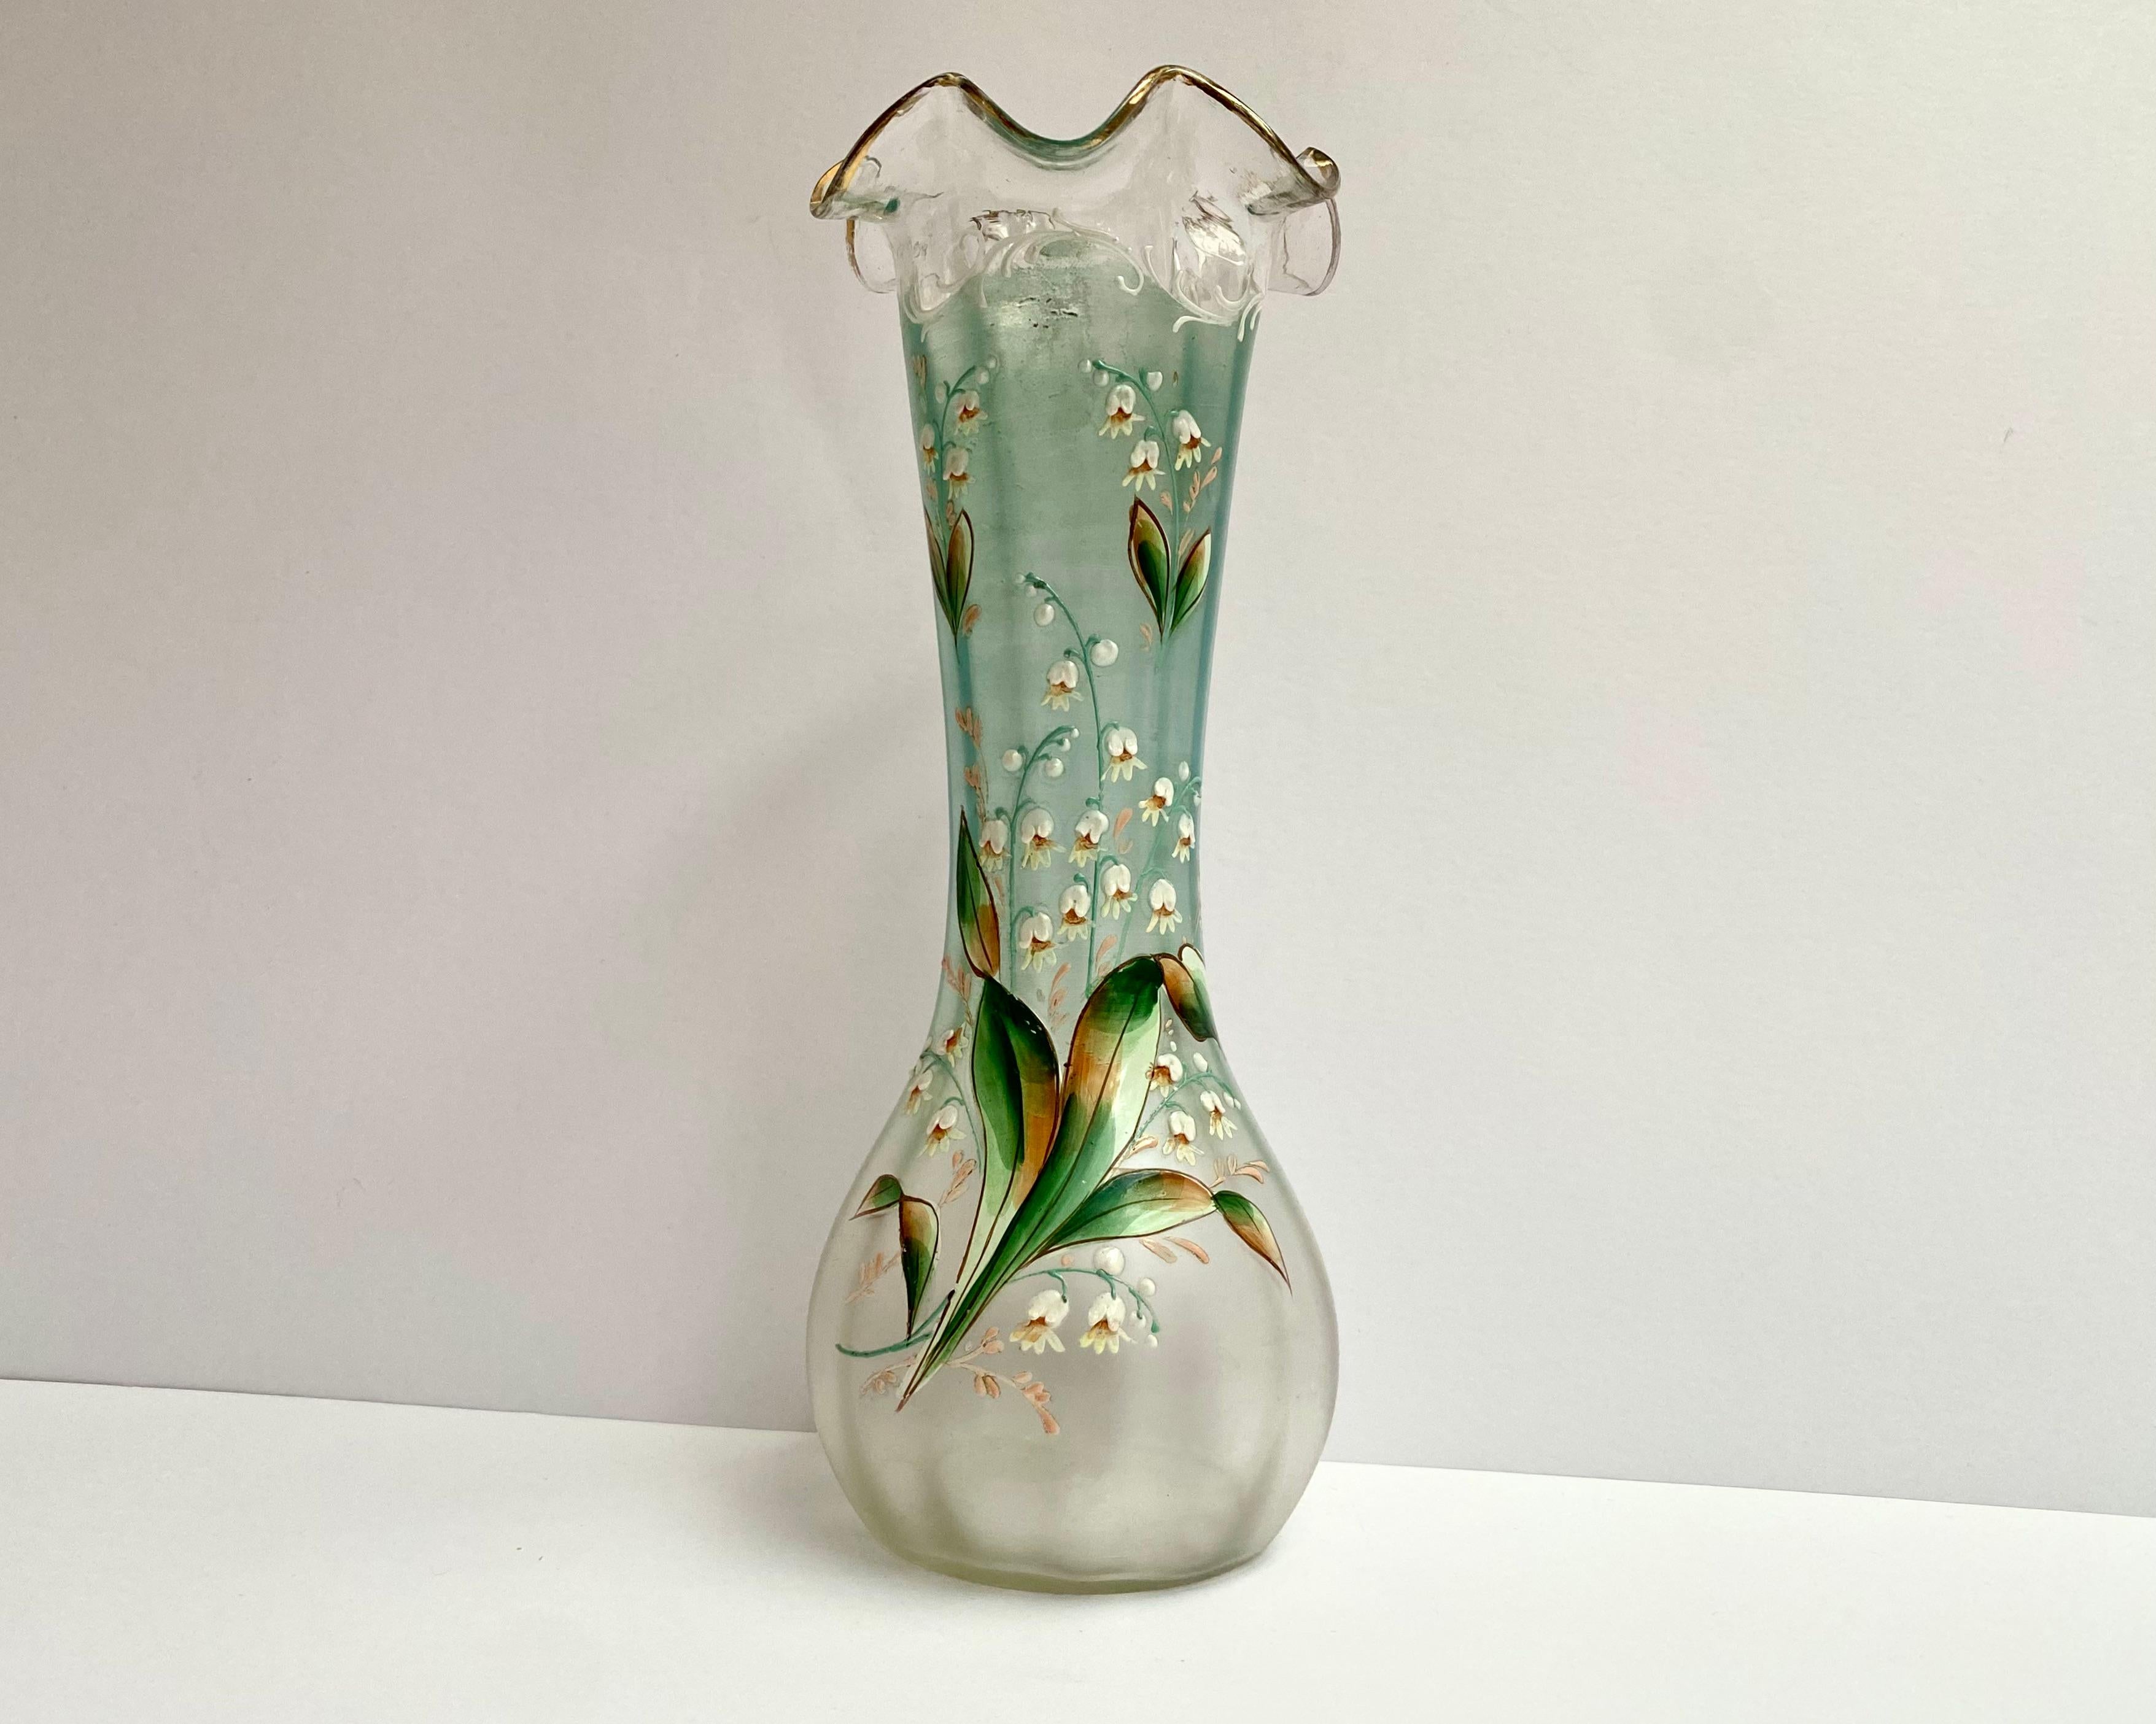 Beautiful antique glass vase with enamel flower details.

The lily flowers on the front are beautifully detailed in white and green. 

The design includes green branches and white pattern. The enamel work is very heavy and gives the flowers a